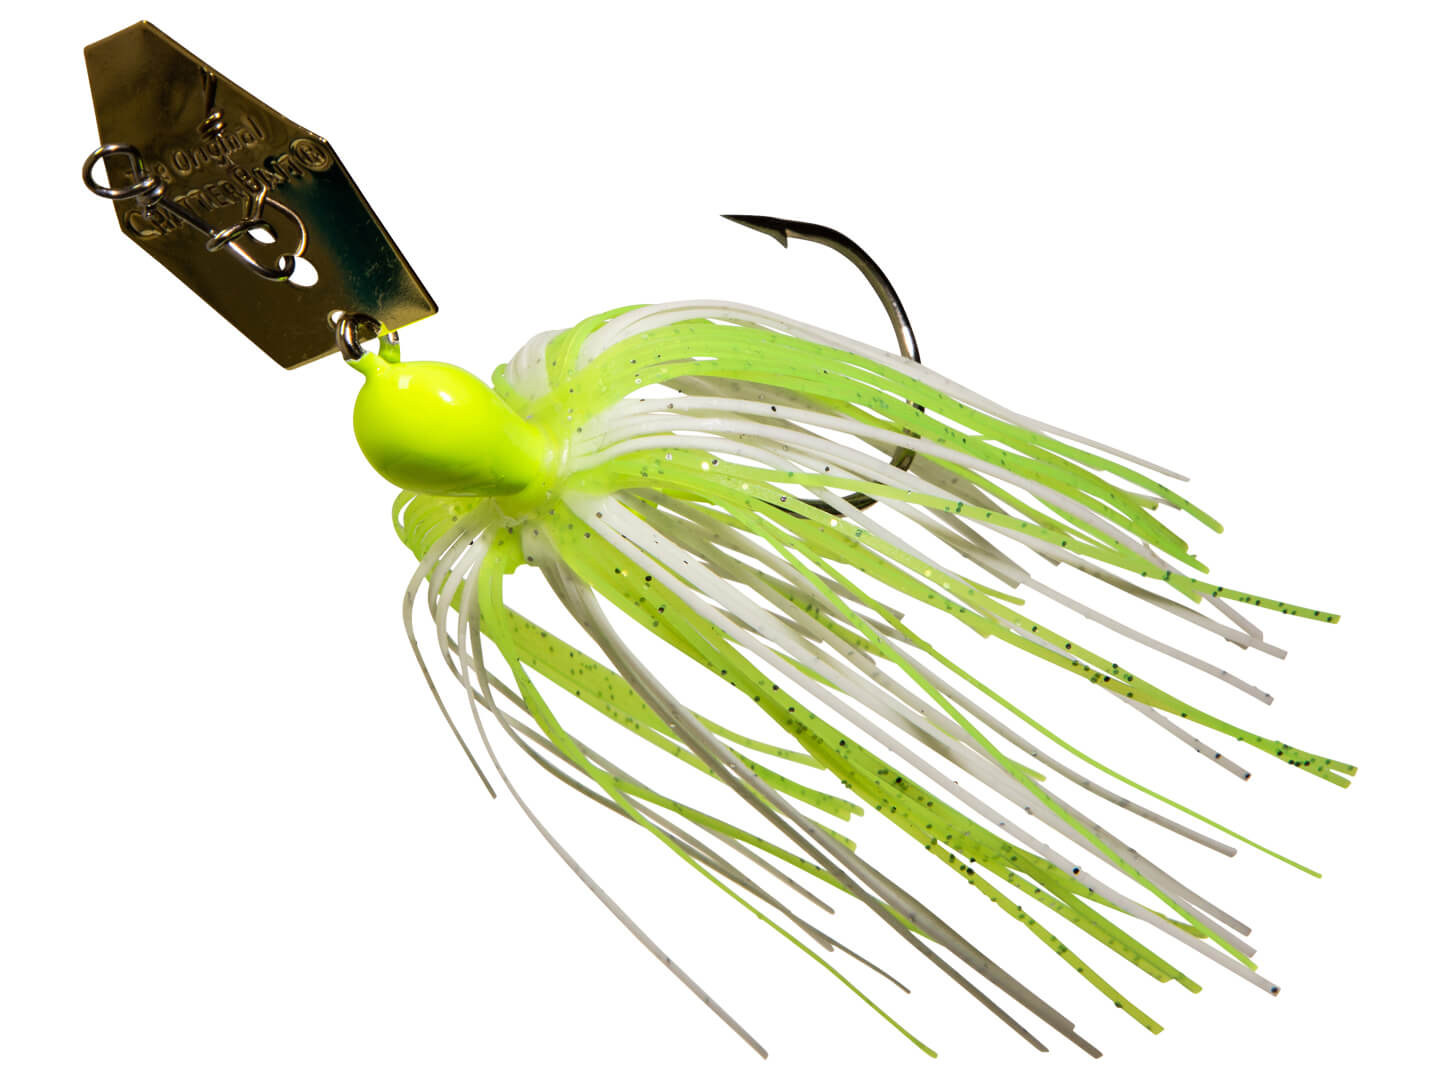 Z-Man Original ChatterBait – Harpeth River Outfitters